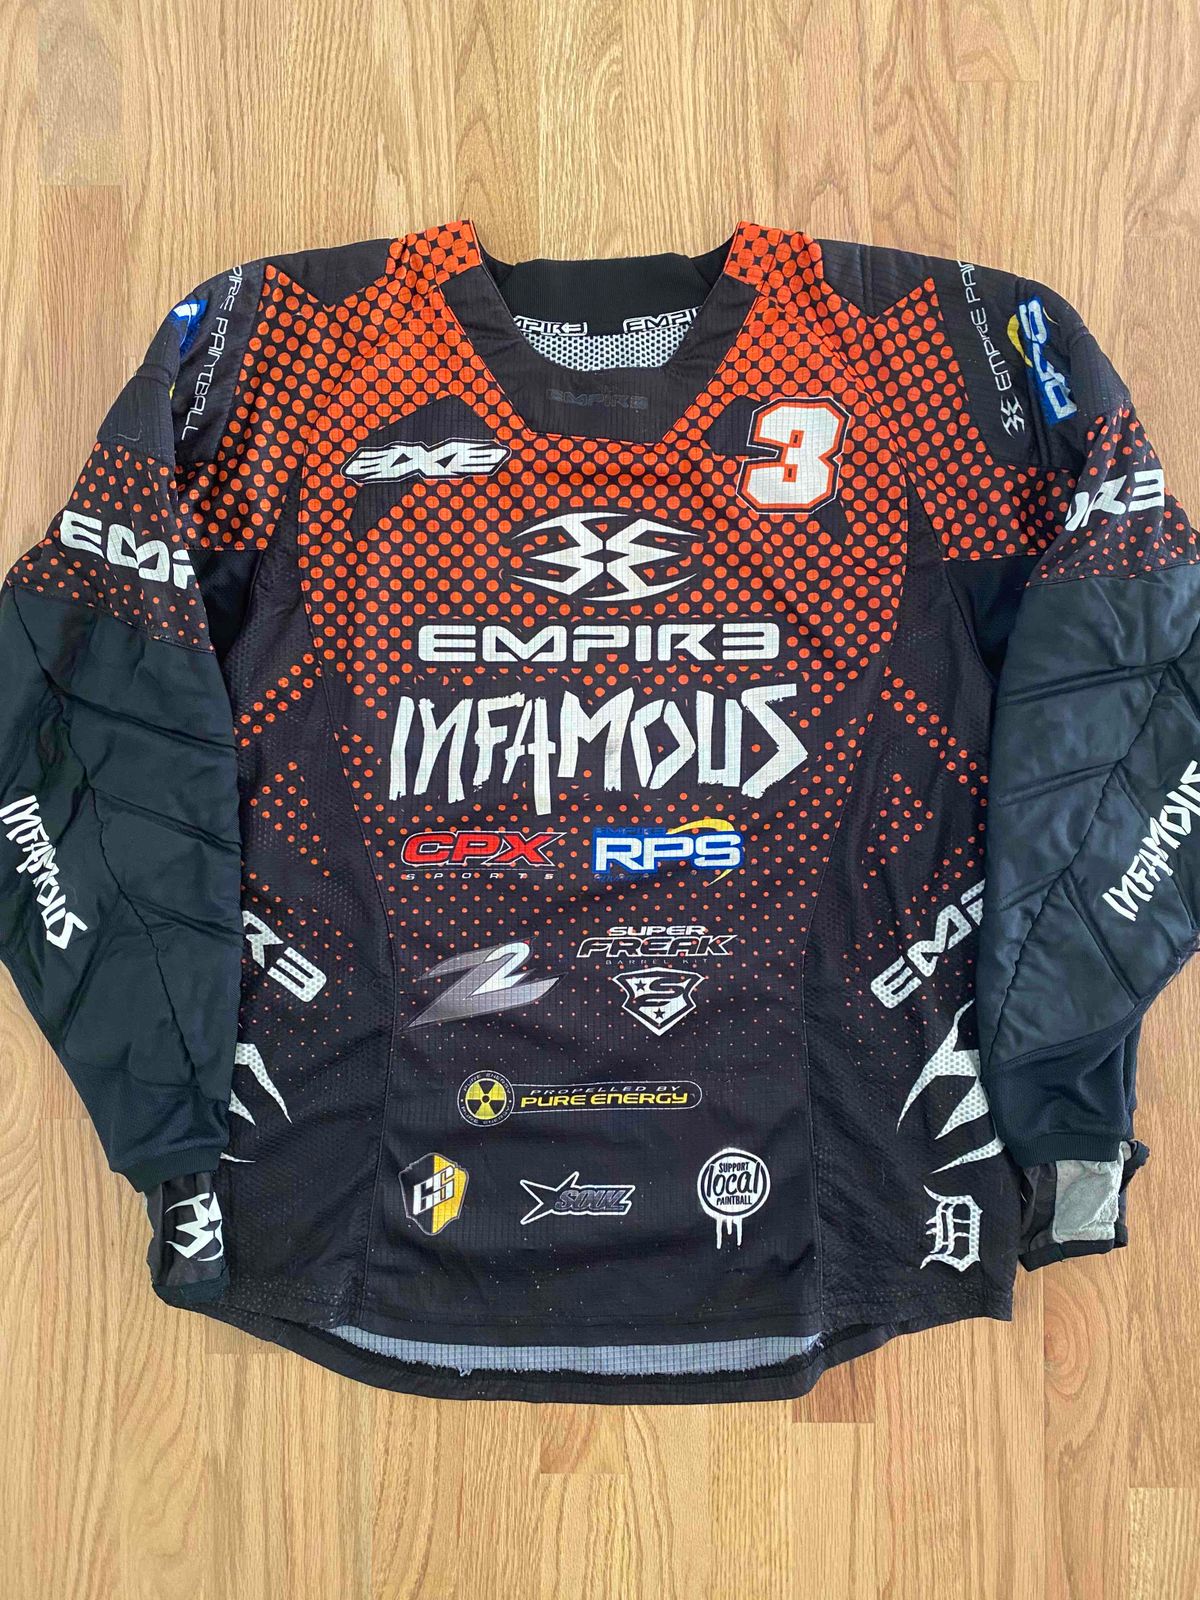 2012 Infamous Jersey